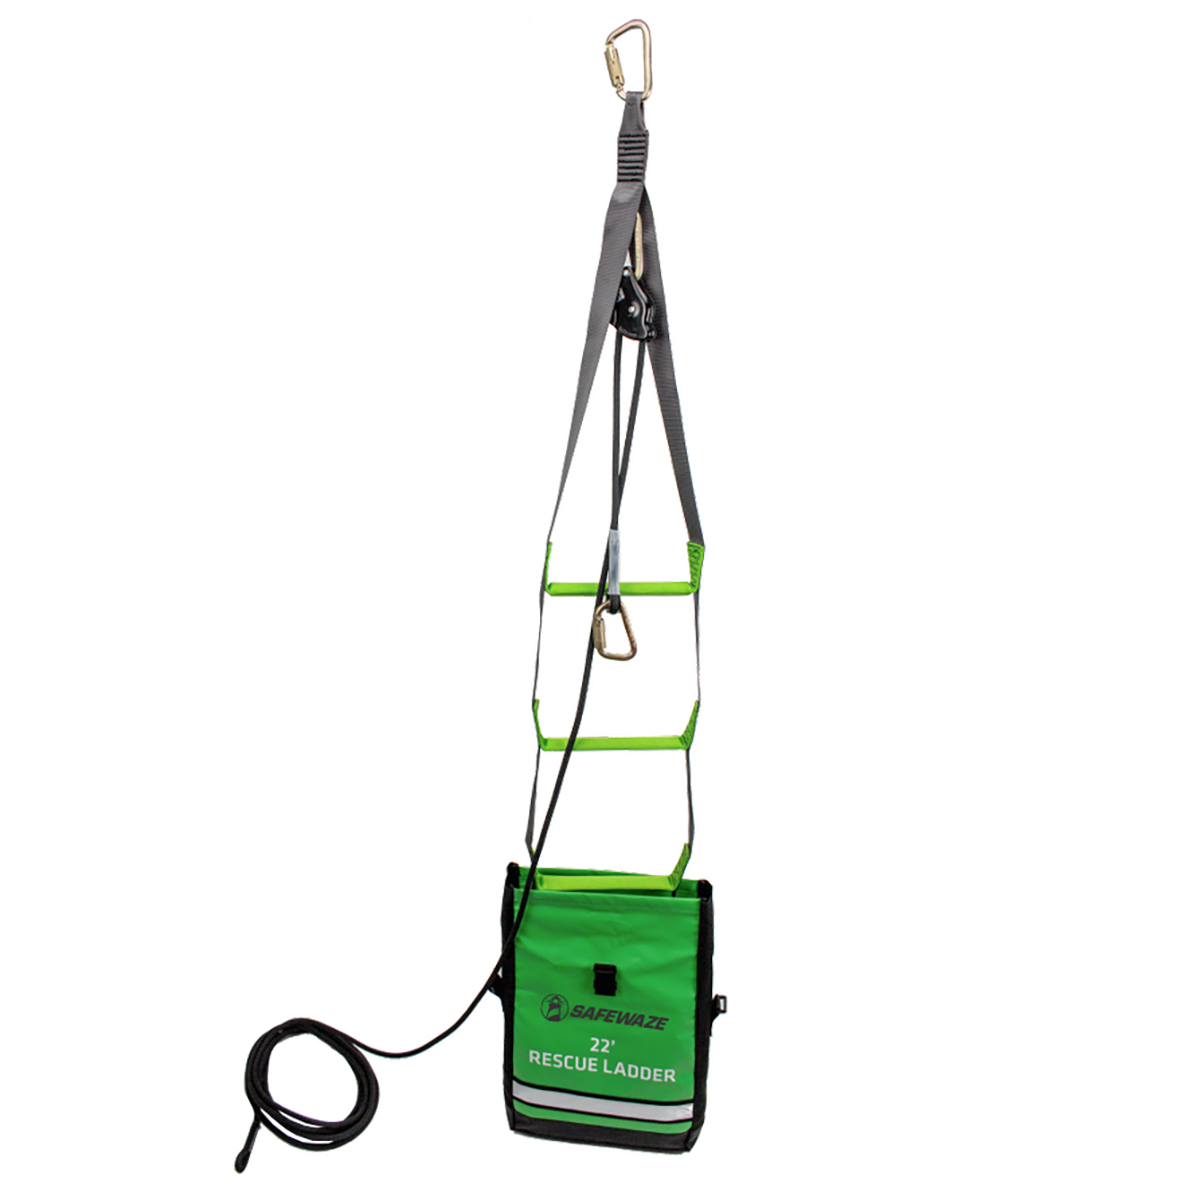 22ft Rescue Ladder with Belay